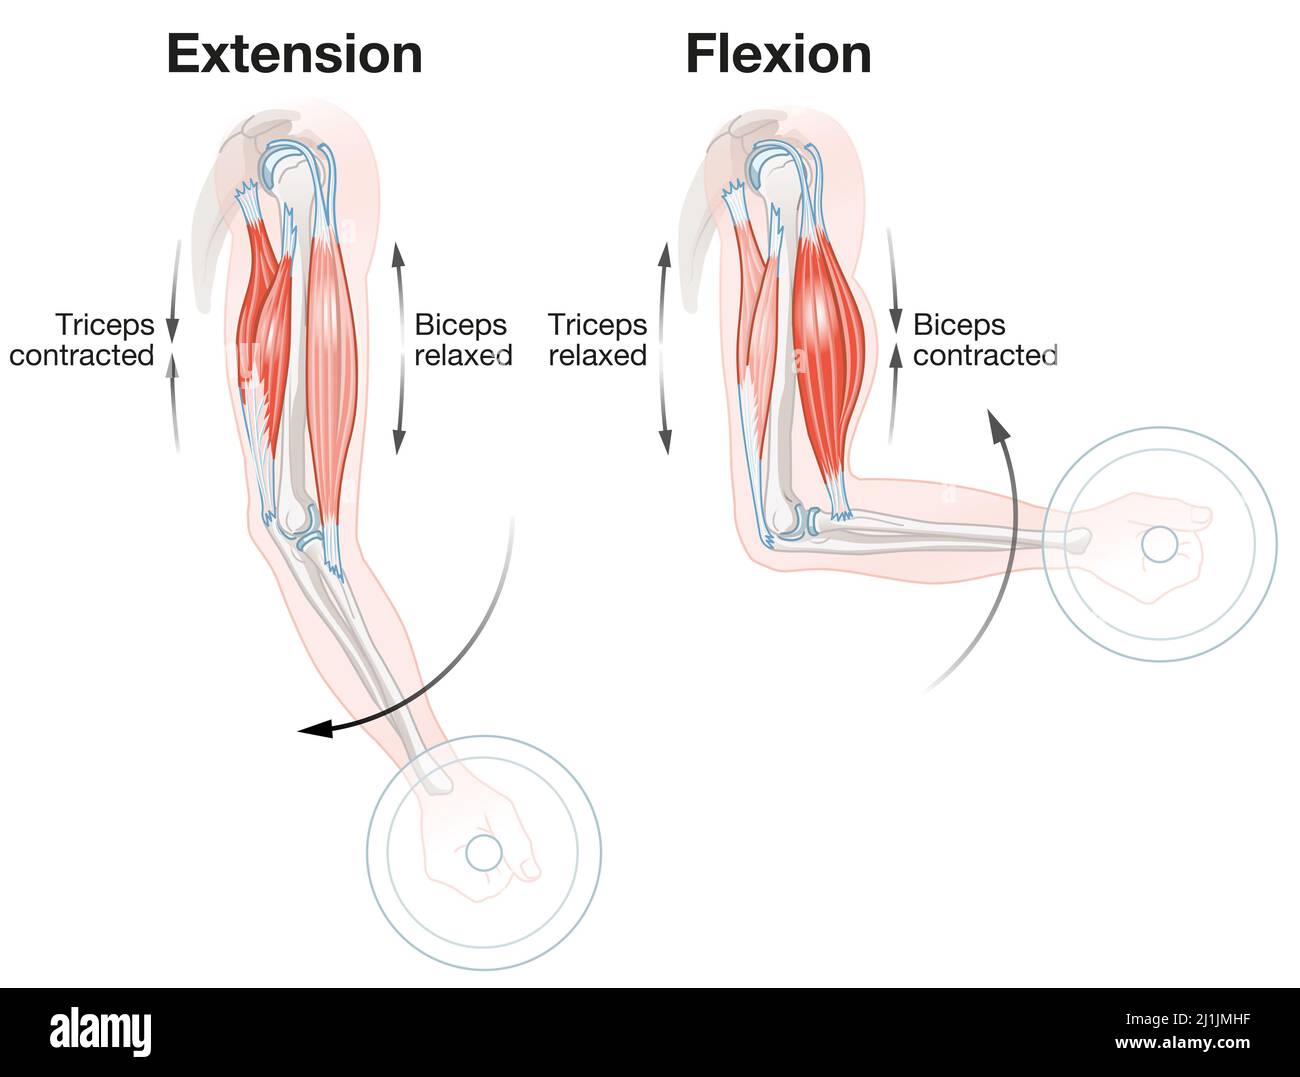 Biceps And Triceps. Extension And Flexion. Labeled Illustration